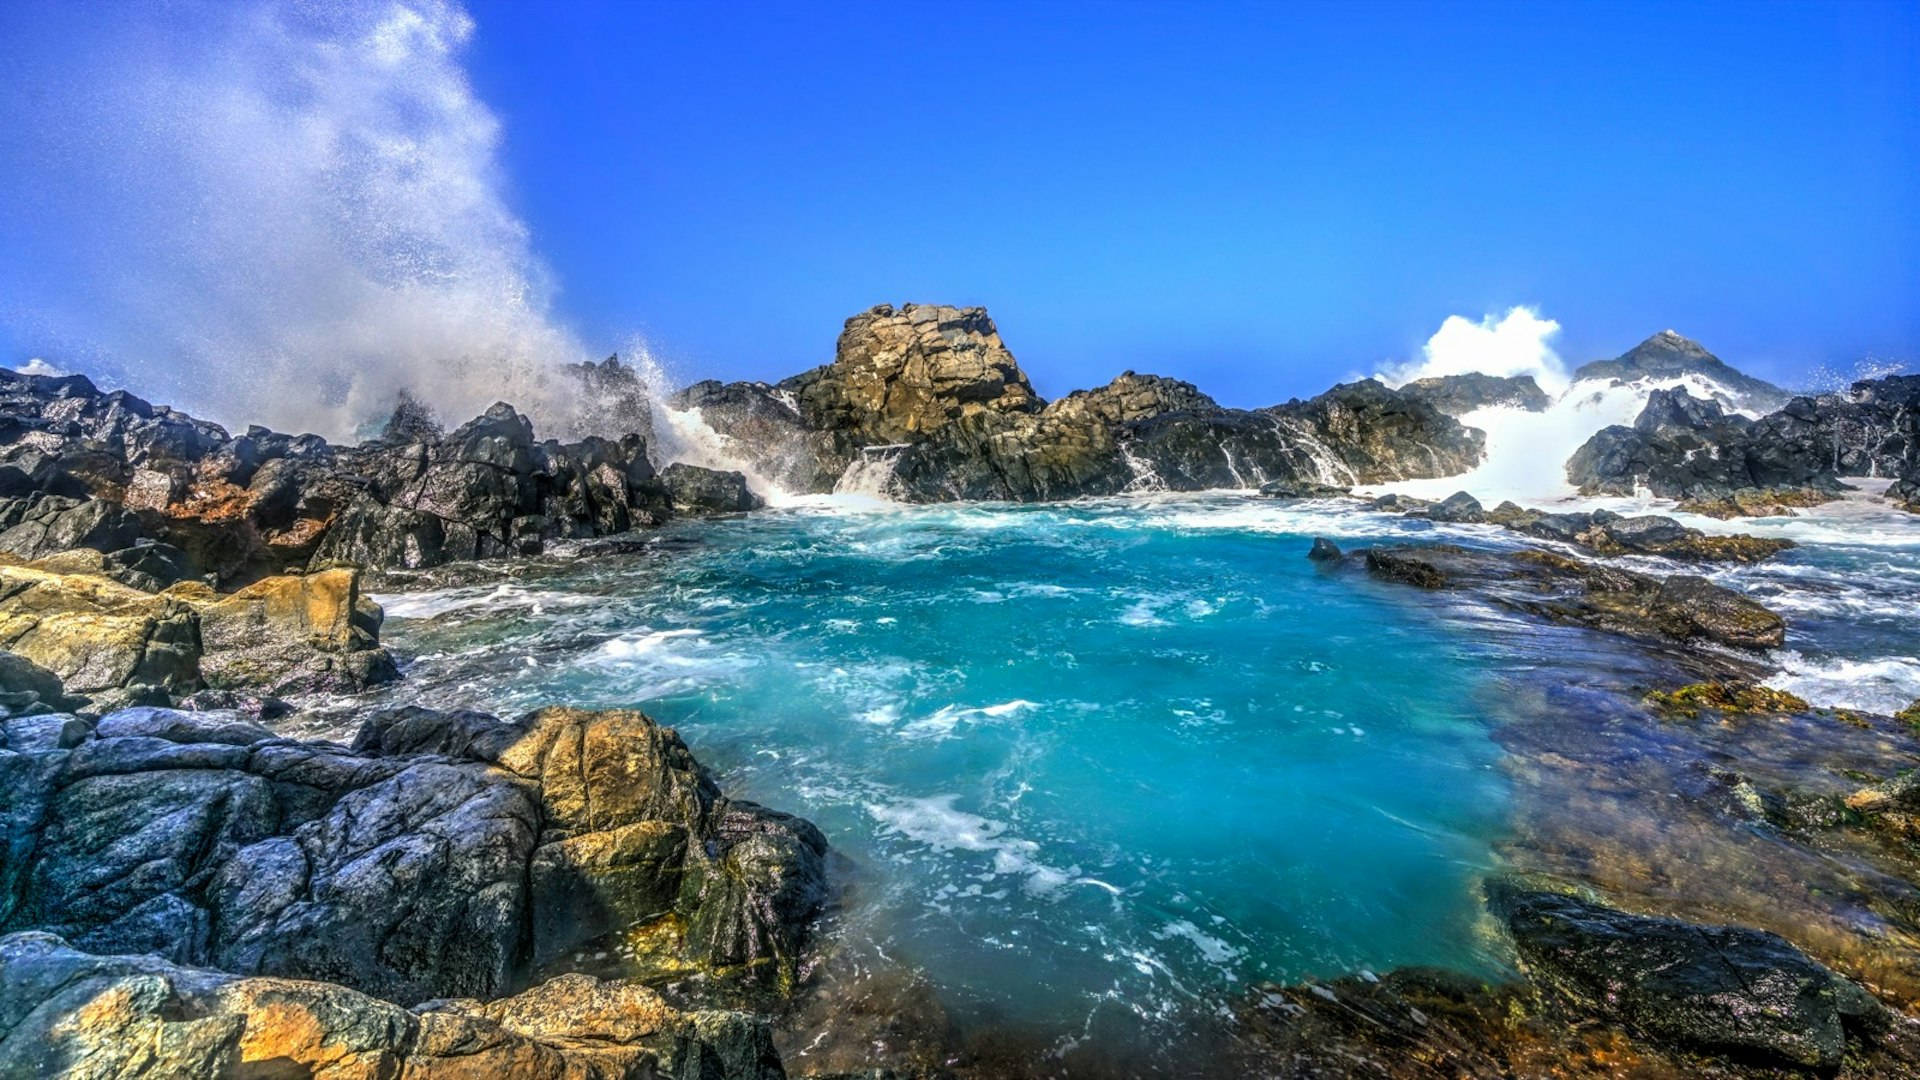 A wave crashes against the rock near the Natural Pool in Aruba © Chiragsinh Yadav / Shutterstock